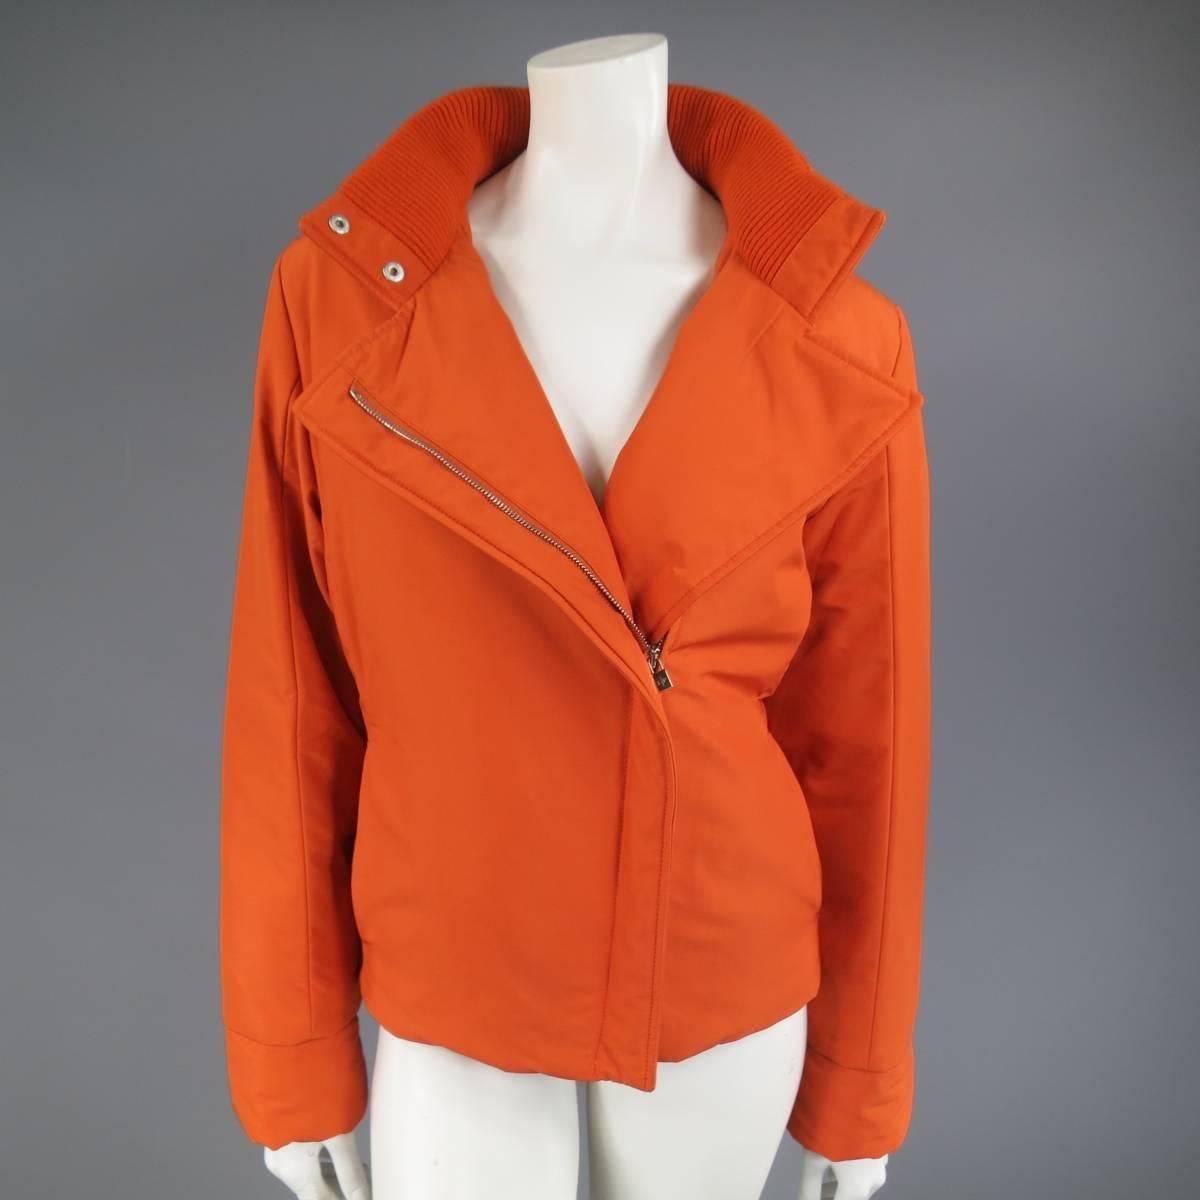 This classic LORO PIANA Storm System ski jacket comes in an orange polyester blend and features a high stand up snap collar with ribbed liner, detachable zip off hood, slit pockets, slanted hidden zip closure, and green satin padded liner. Made in